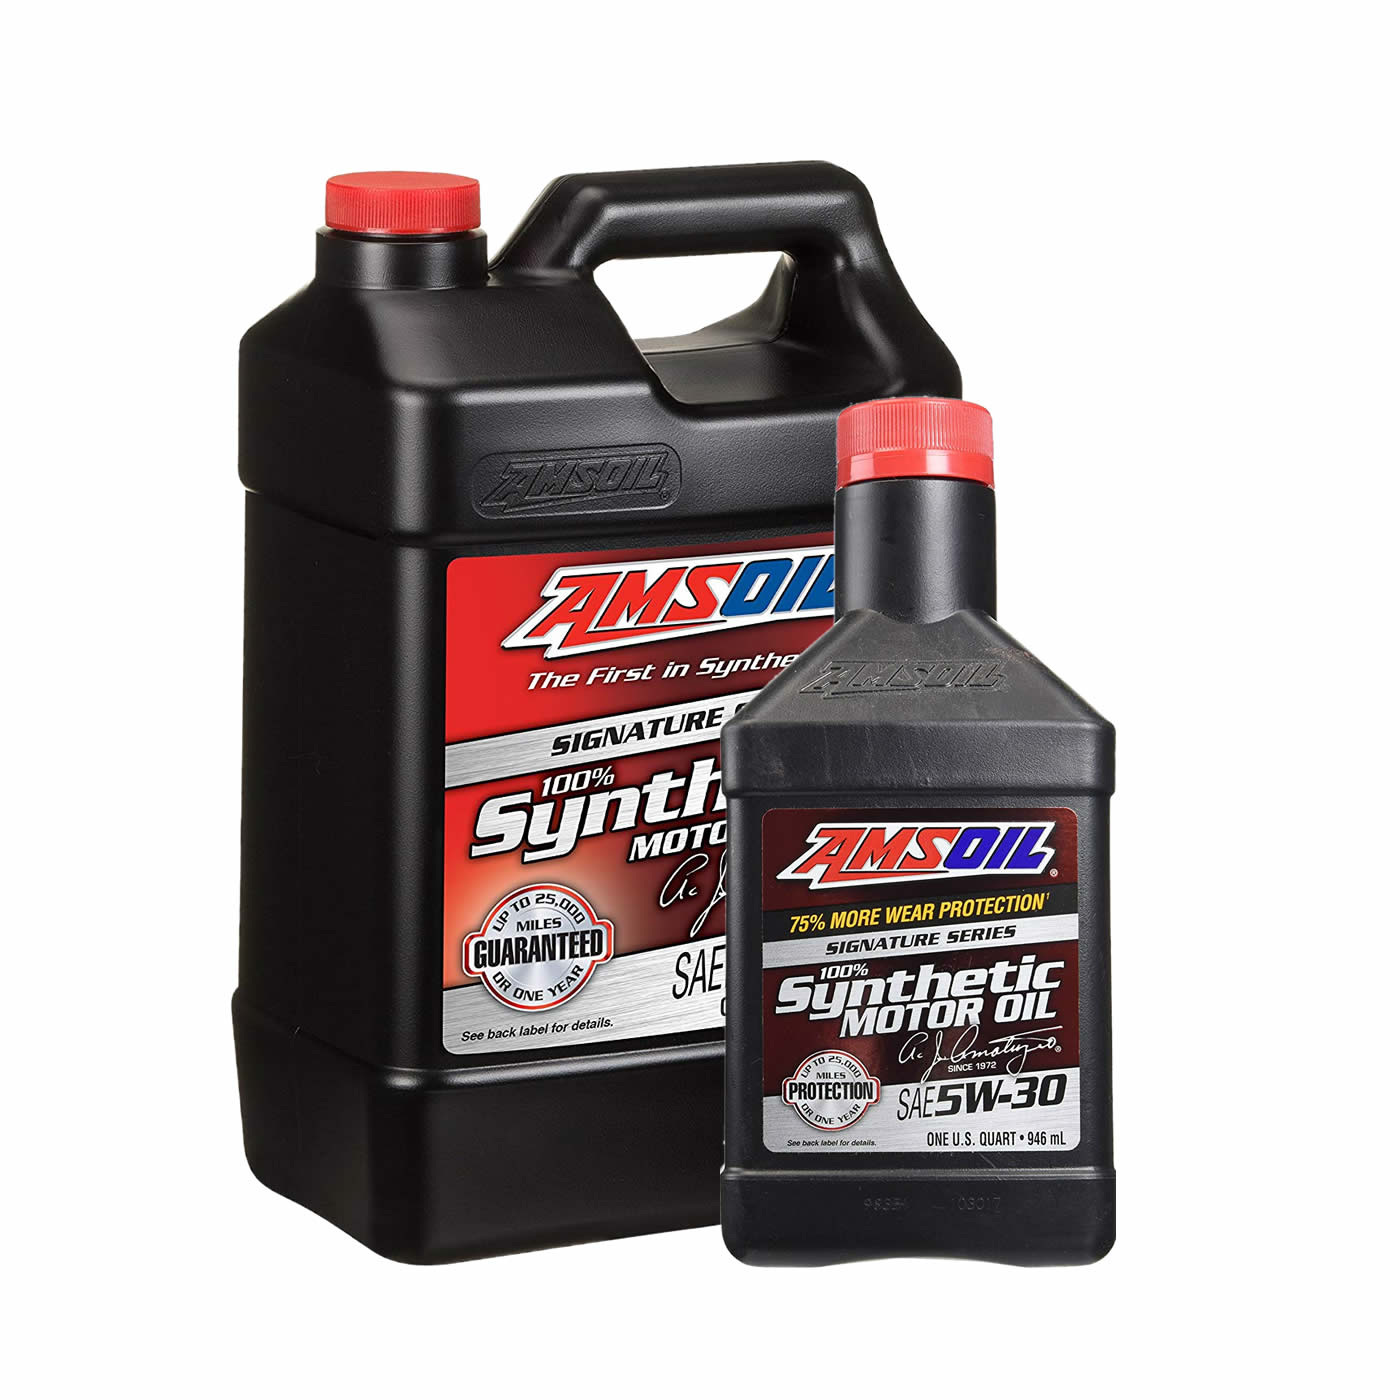 Is Mobil 1 The Best Synthetic Oil